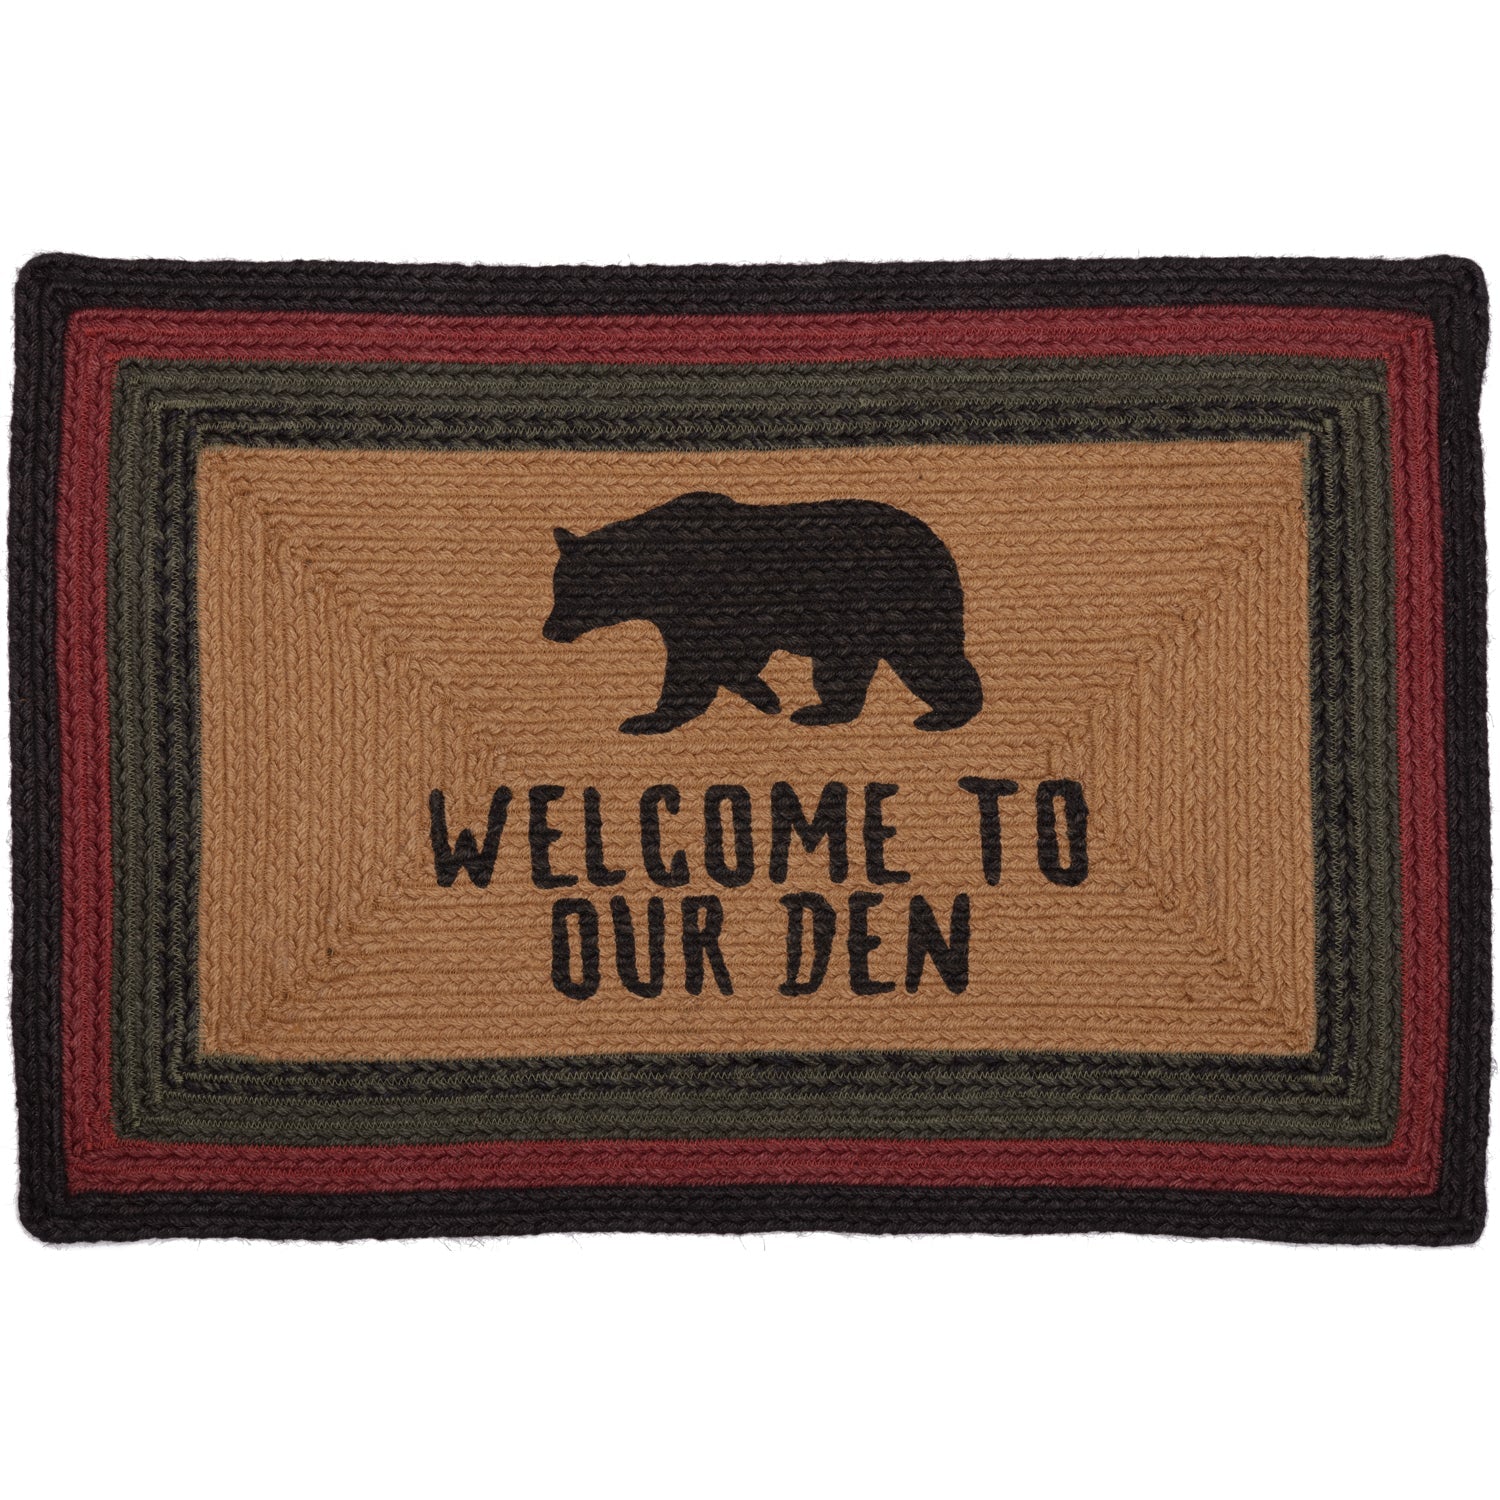 Wyatt Stenciled Bear Jute Rug Rect Welcome to Our Den with rug Pad 20x30 VHC Brands